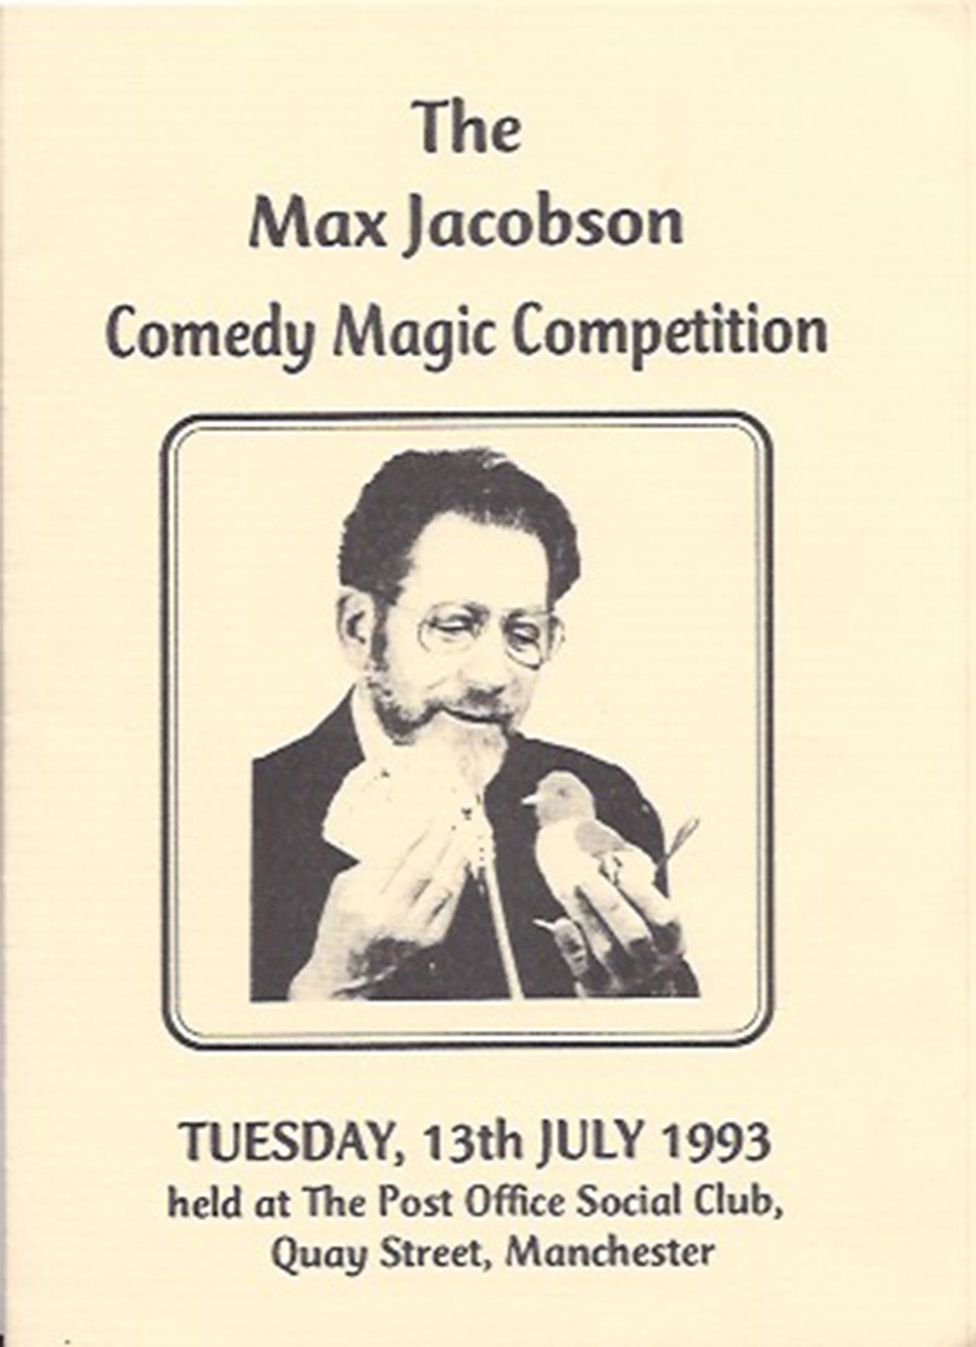 A flyer for Howard Jacobson's father's magic show